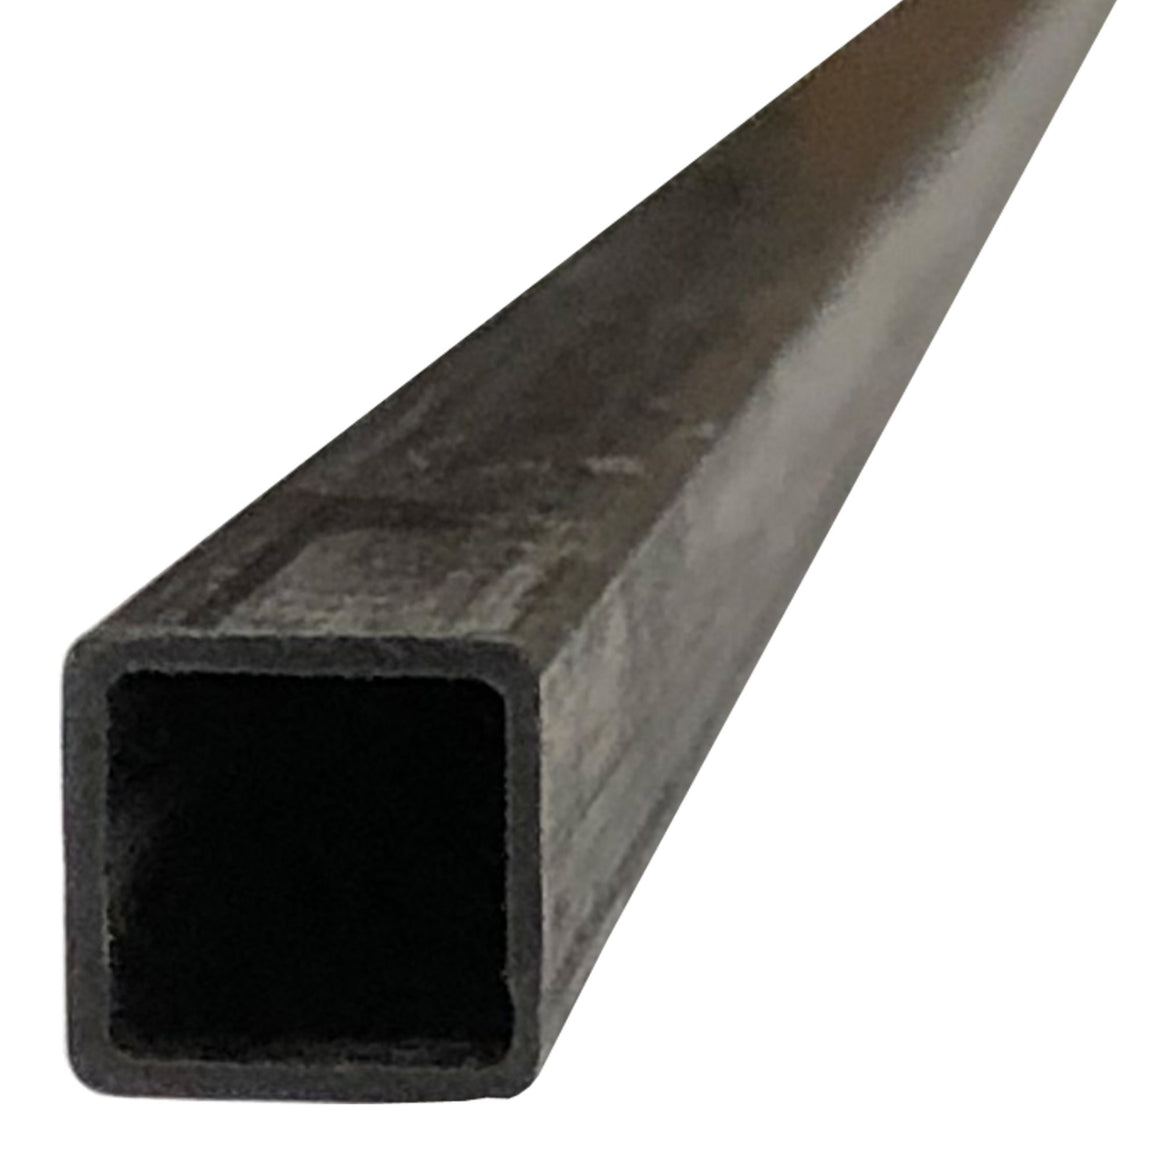 (2) Pultruded Square Carbon Fiber Tube - 10mm x 10mm x 1000mm